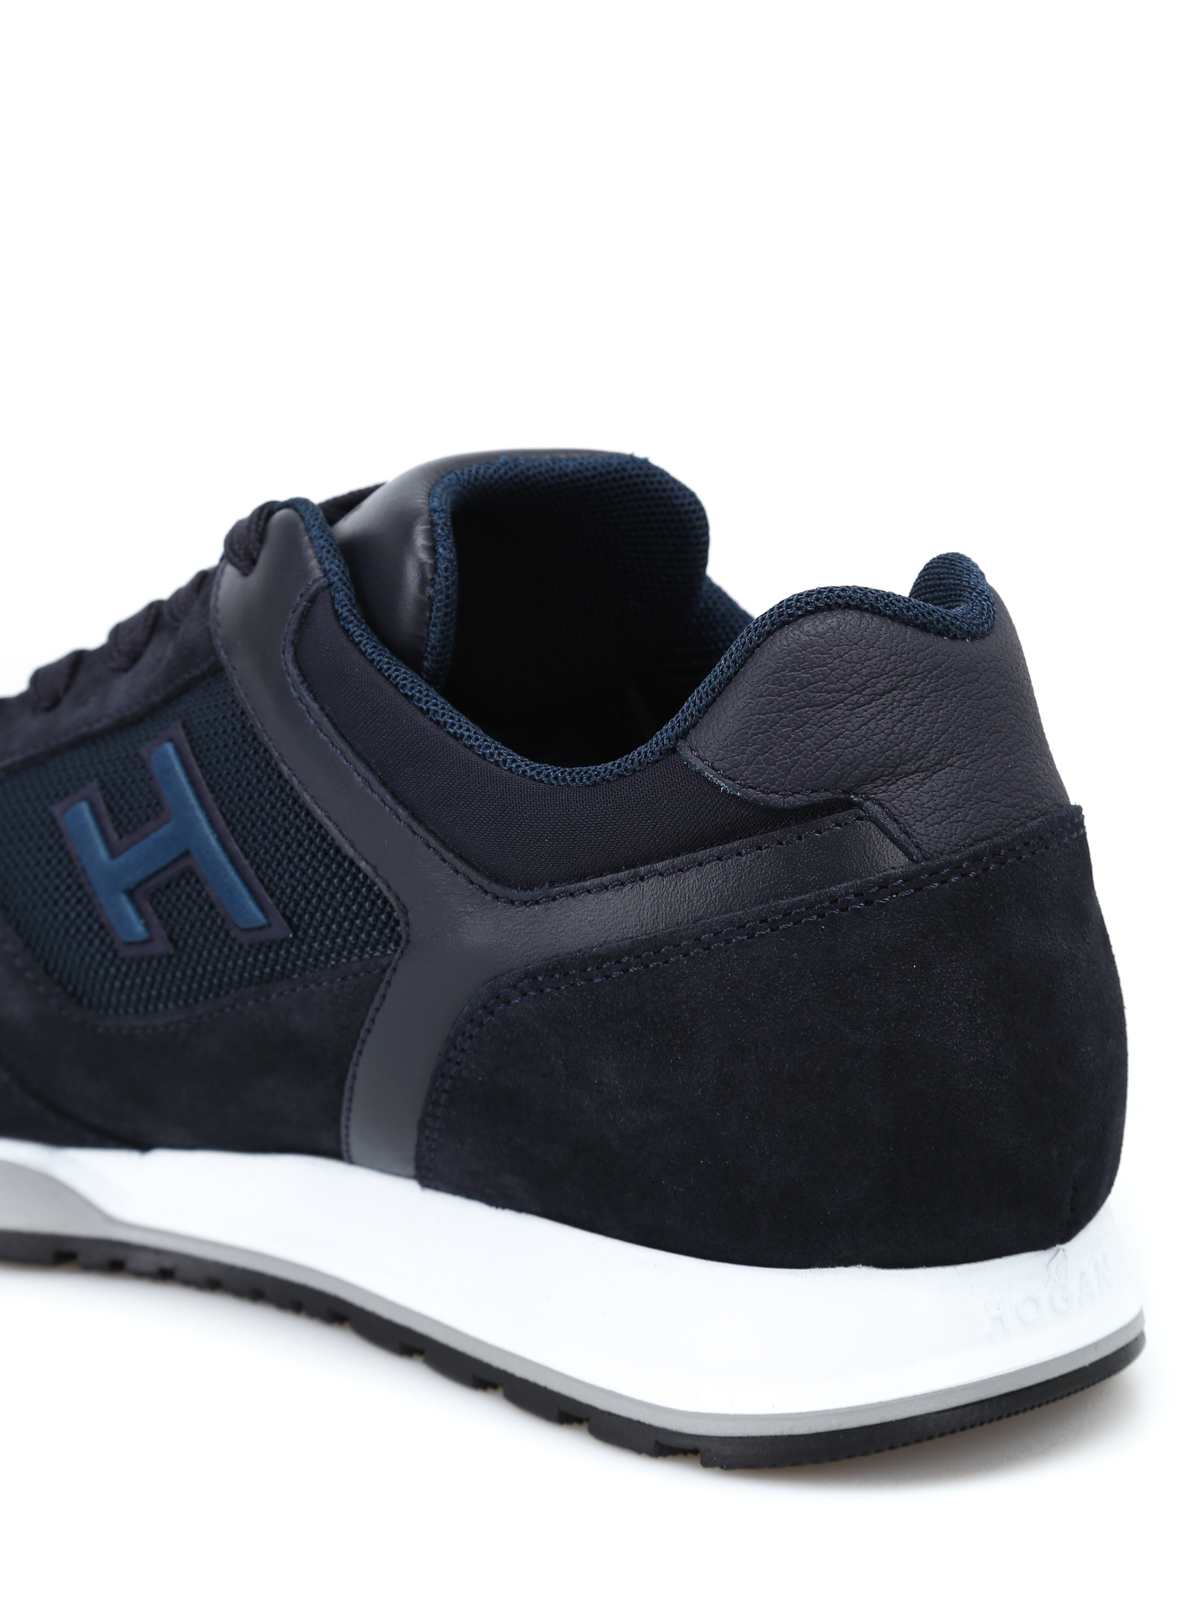 Hogan - H321 blue sneakers - trainers 